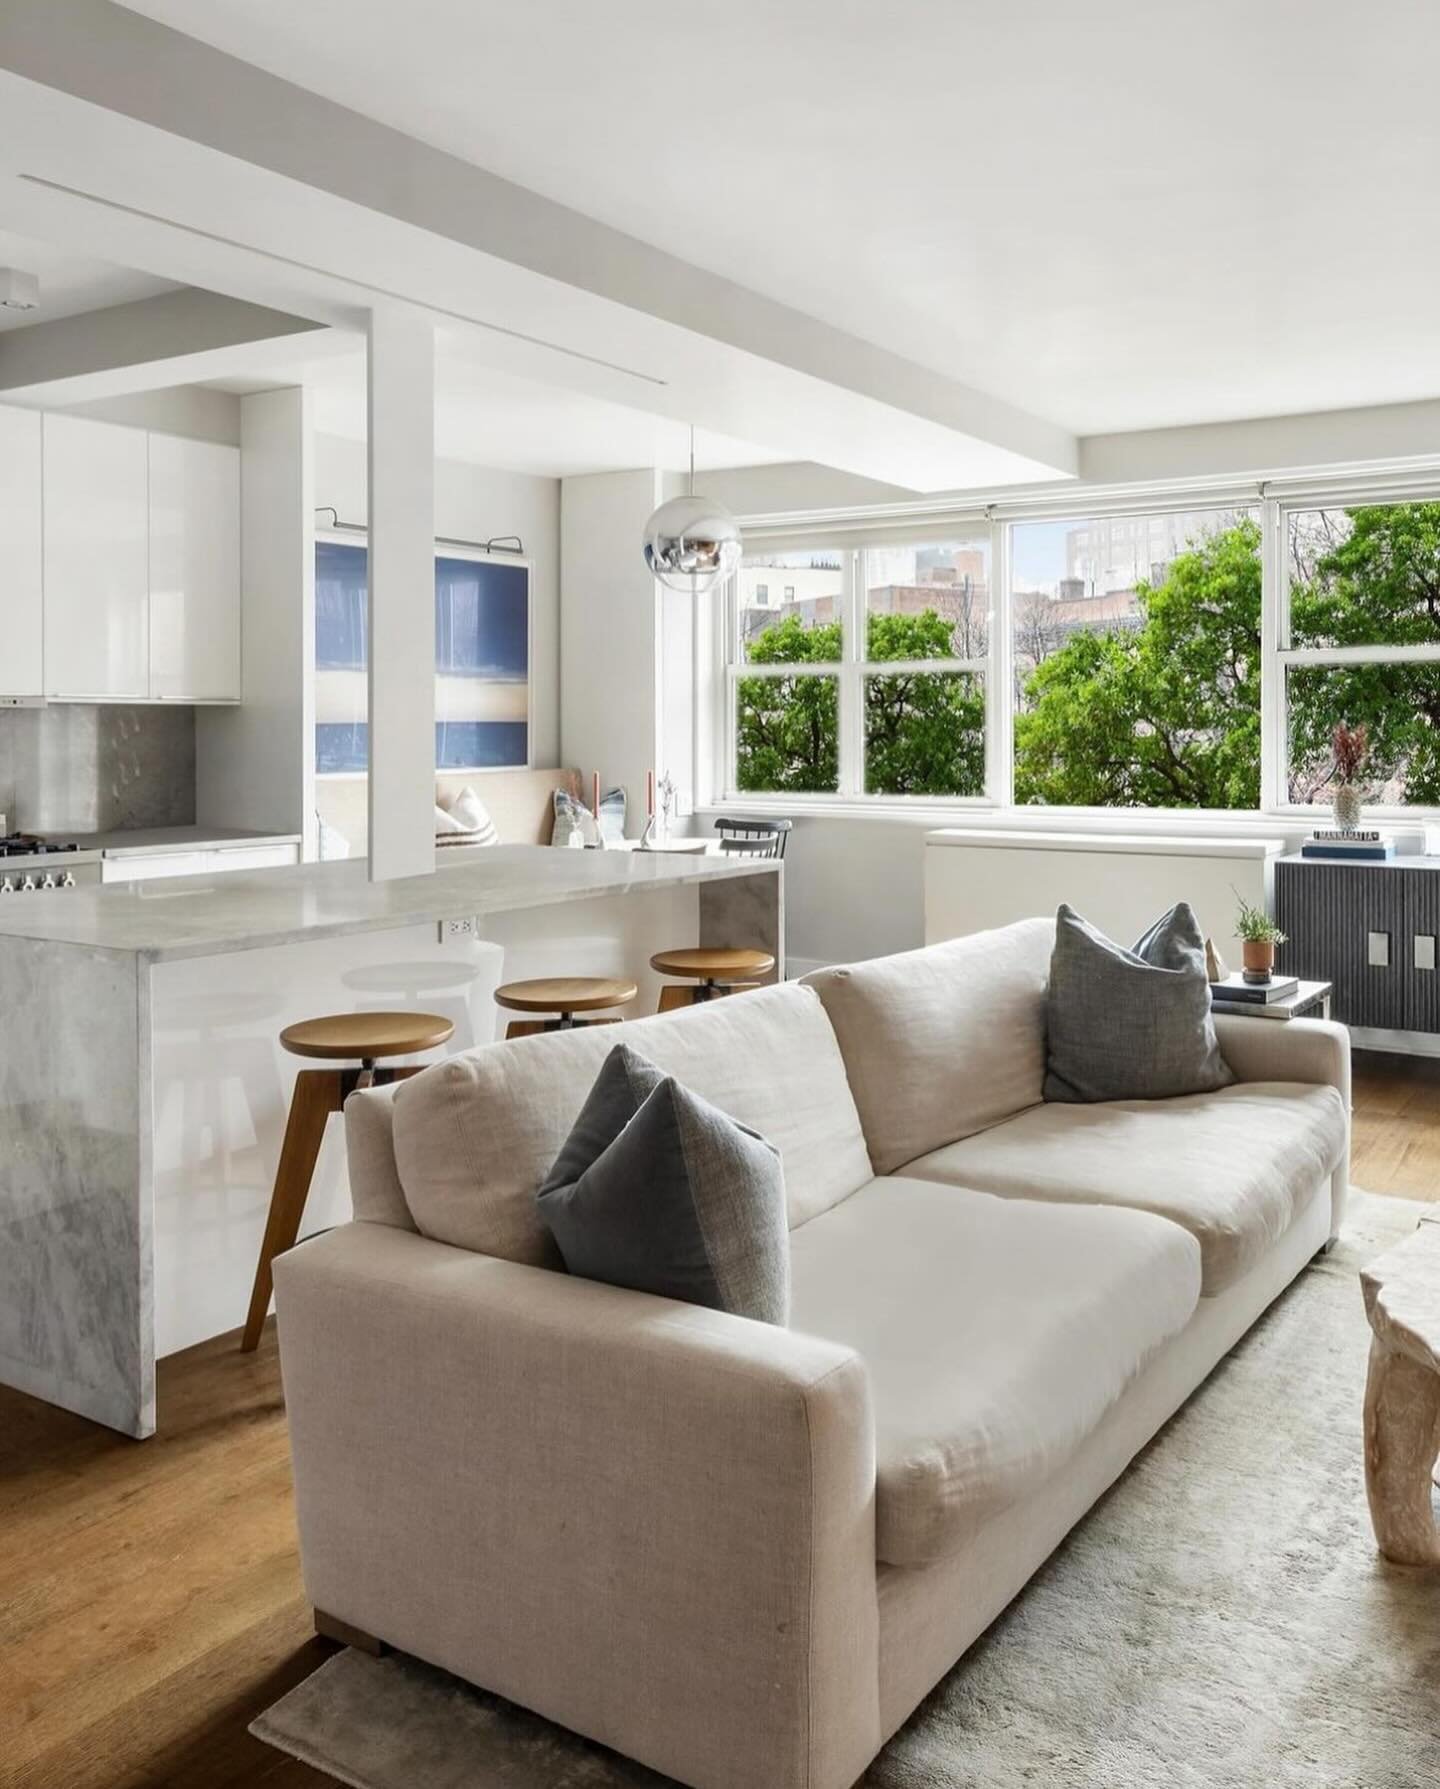 A thoughtfully renovated 3 bedroom and 2 bathroom home in the prestigious Bing &amp; Bing building. Offering northwest sunlight and views of Jackson Square Park. 

2 Horatio Street, 4JS
Offered at: $3,950,000

For more details please get in touch dir